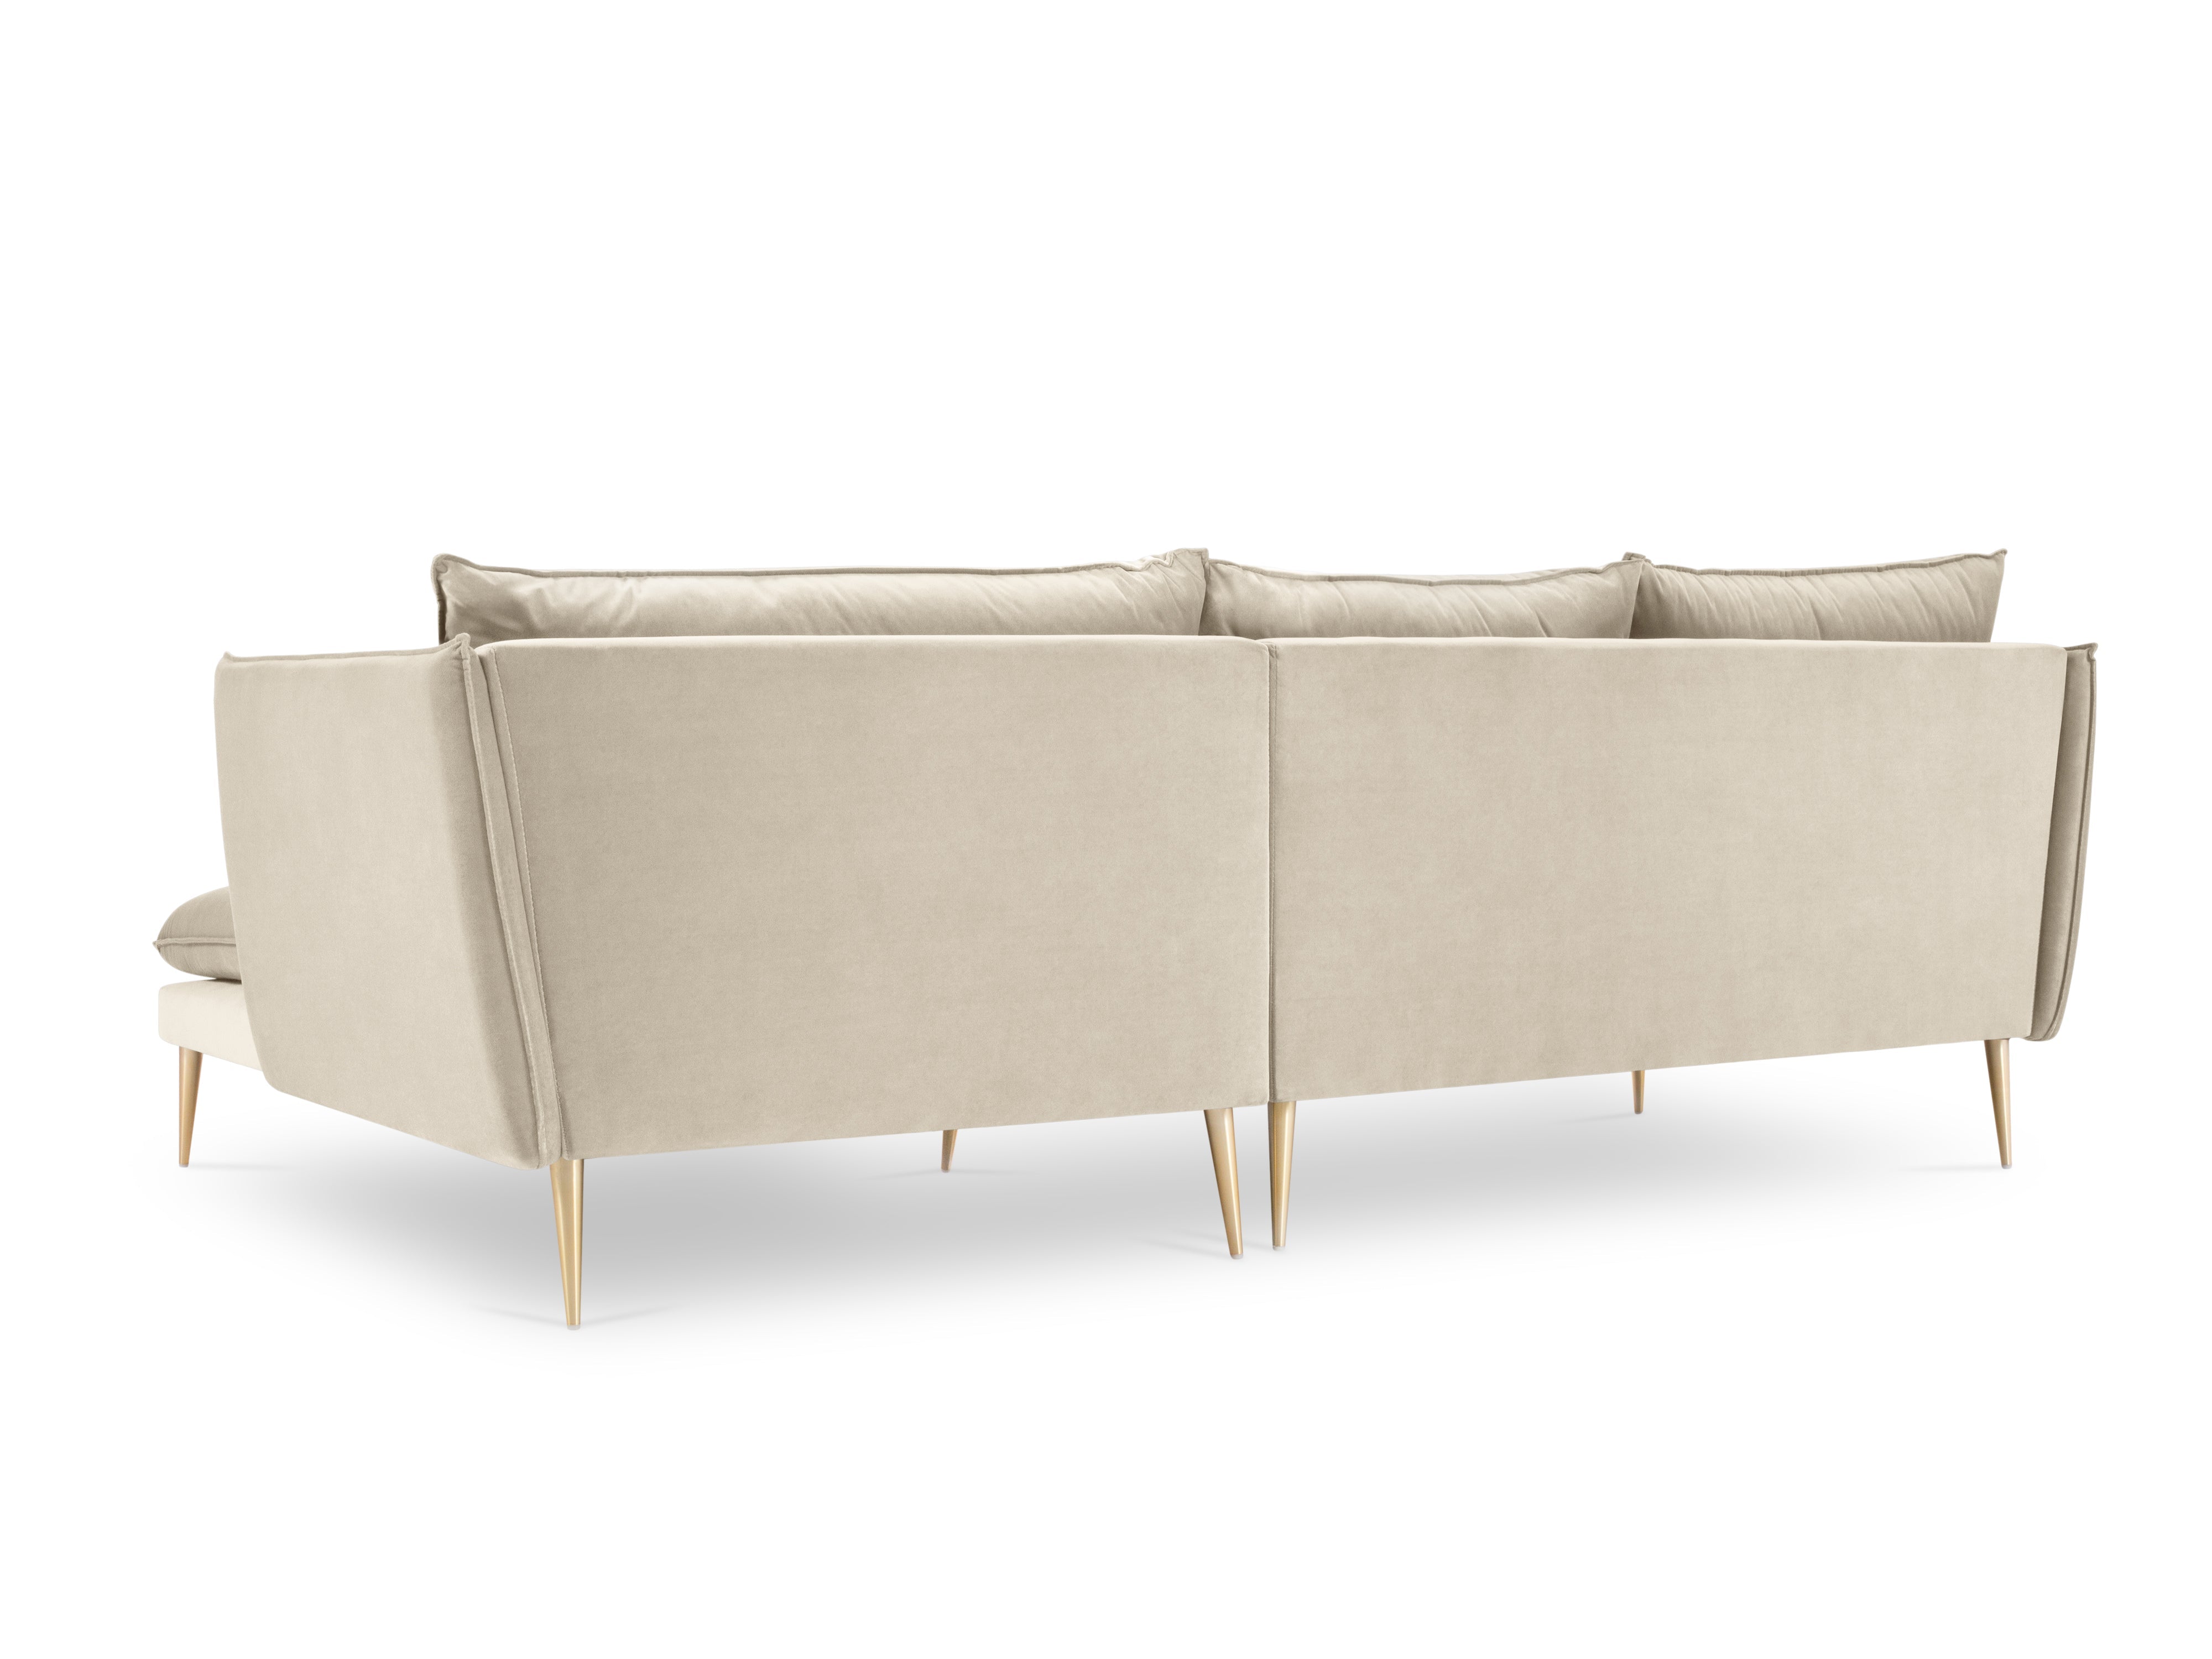 Beige sofa with a golden base